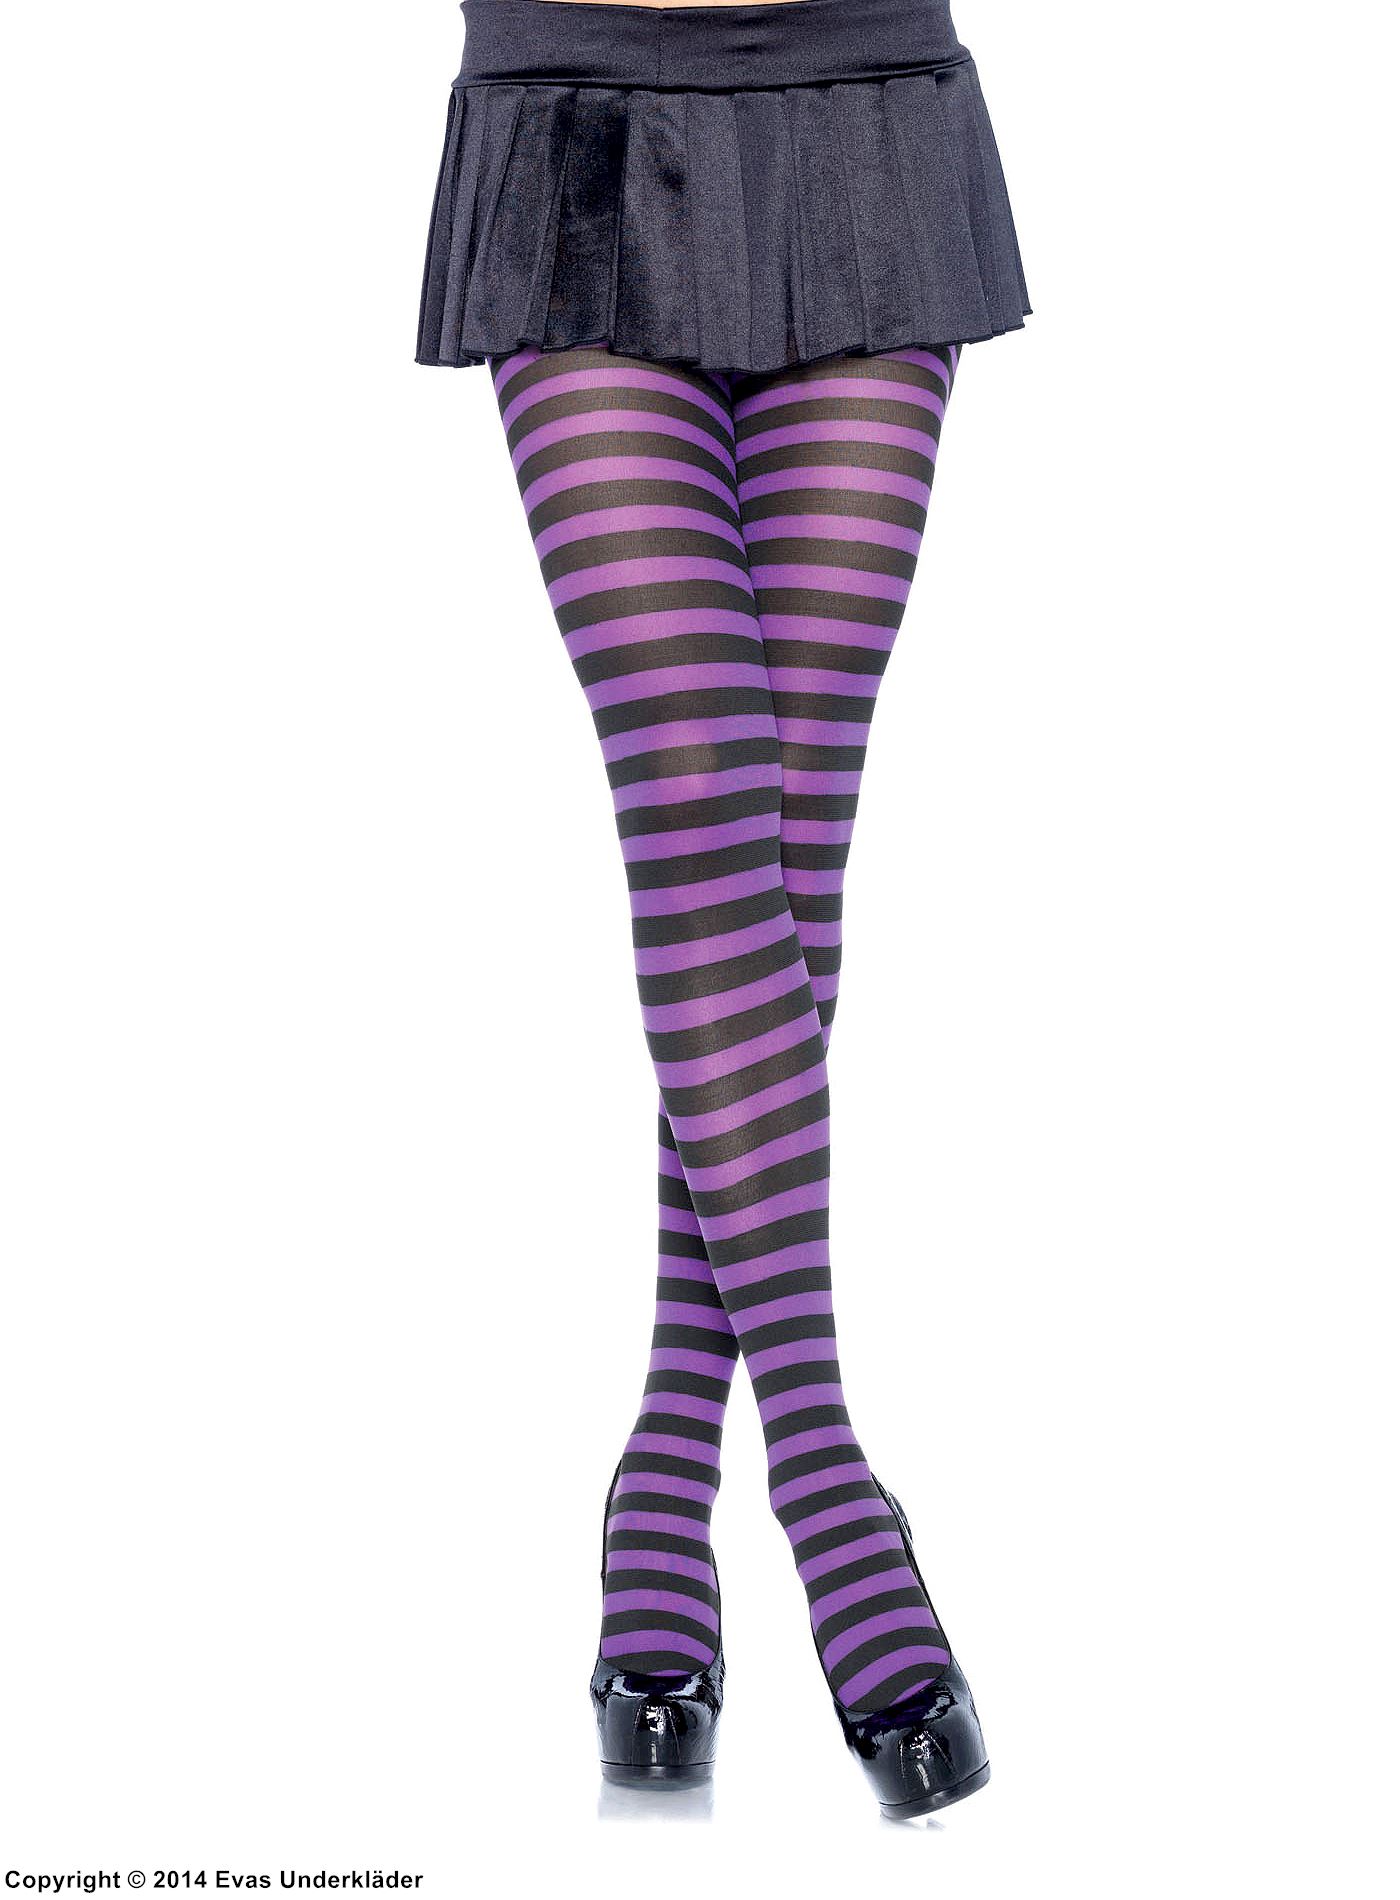 Tights, colorful stripes